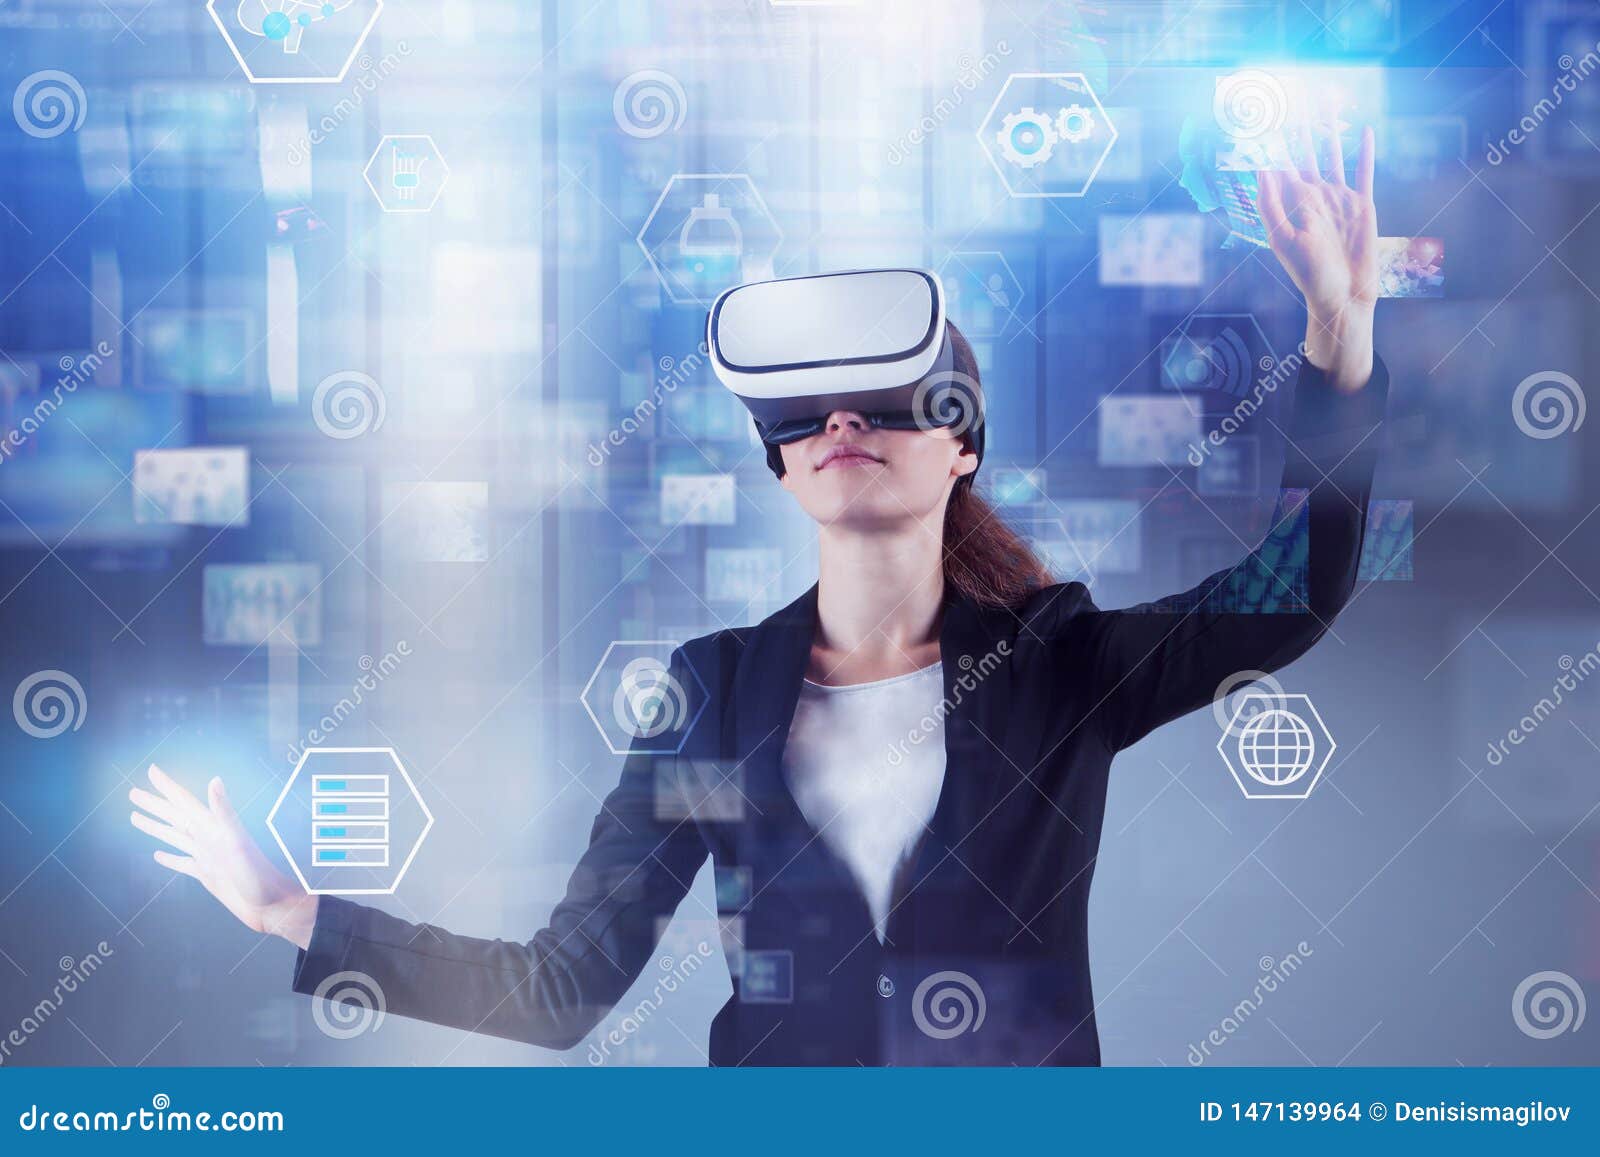 Young Businesswoman Using A VR Headset Stock Image - Image 